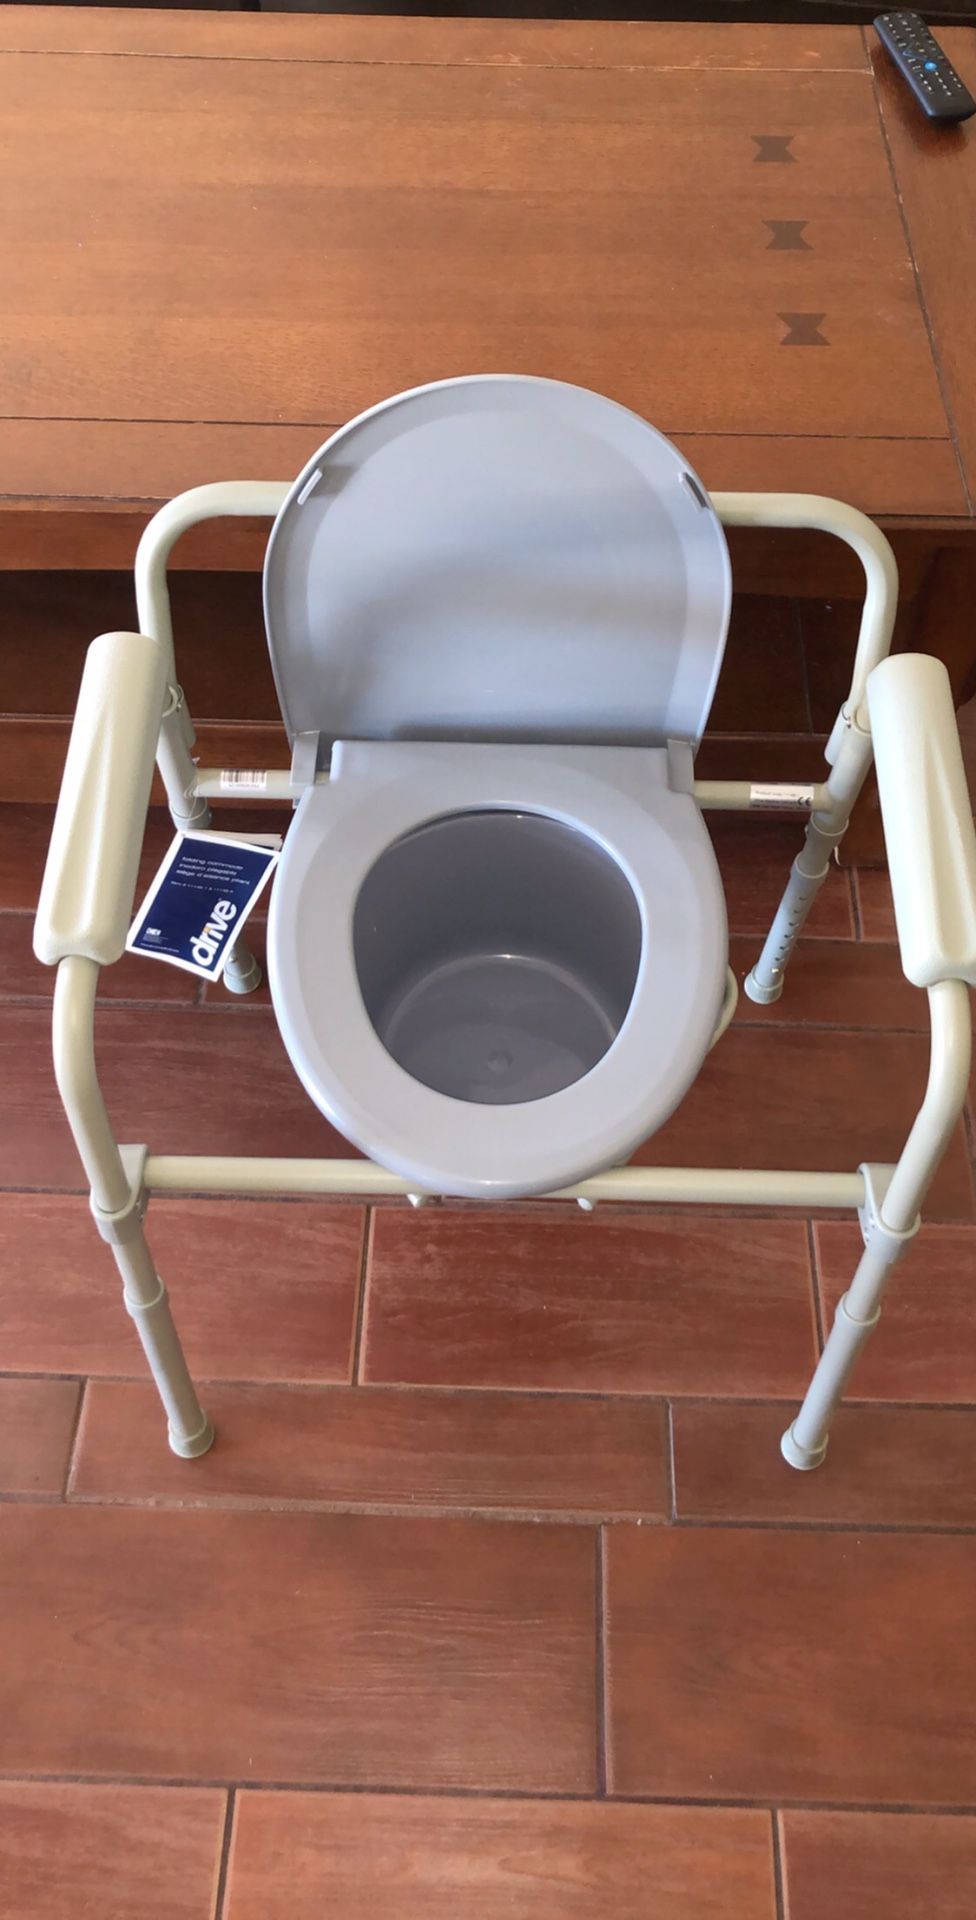 New Drive adult senior commode home health care